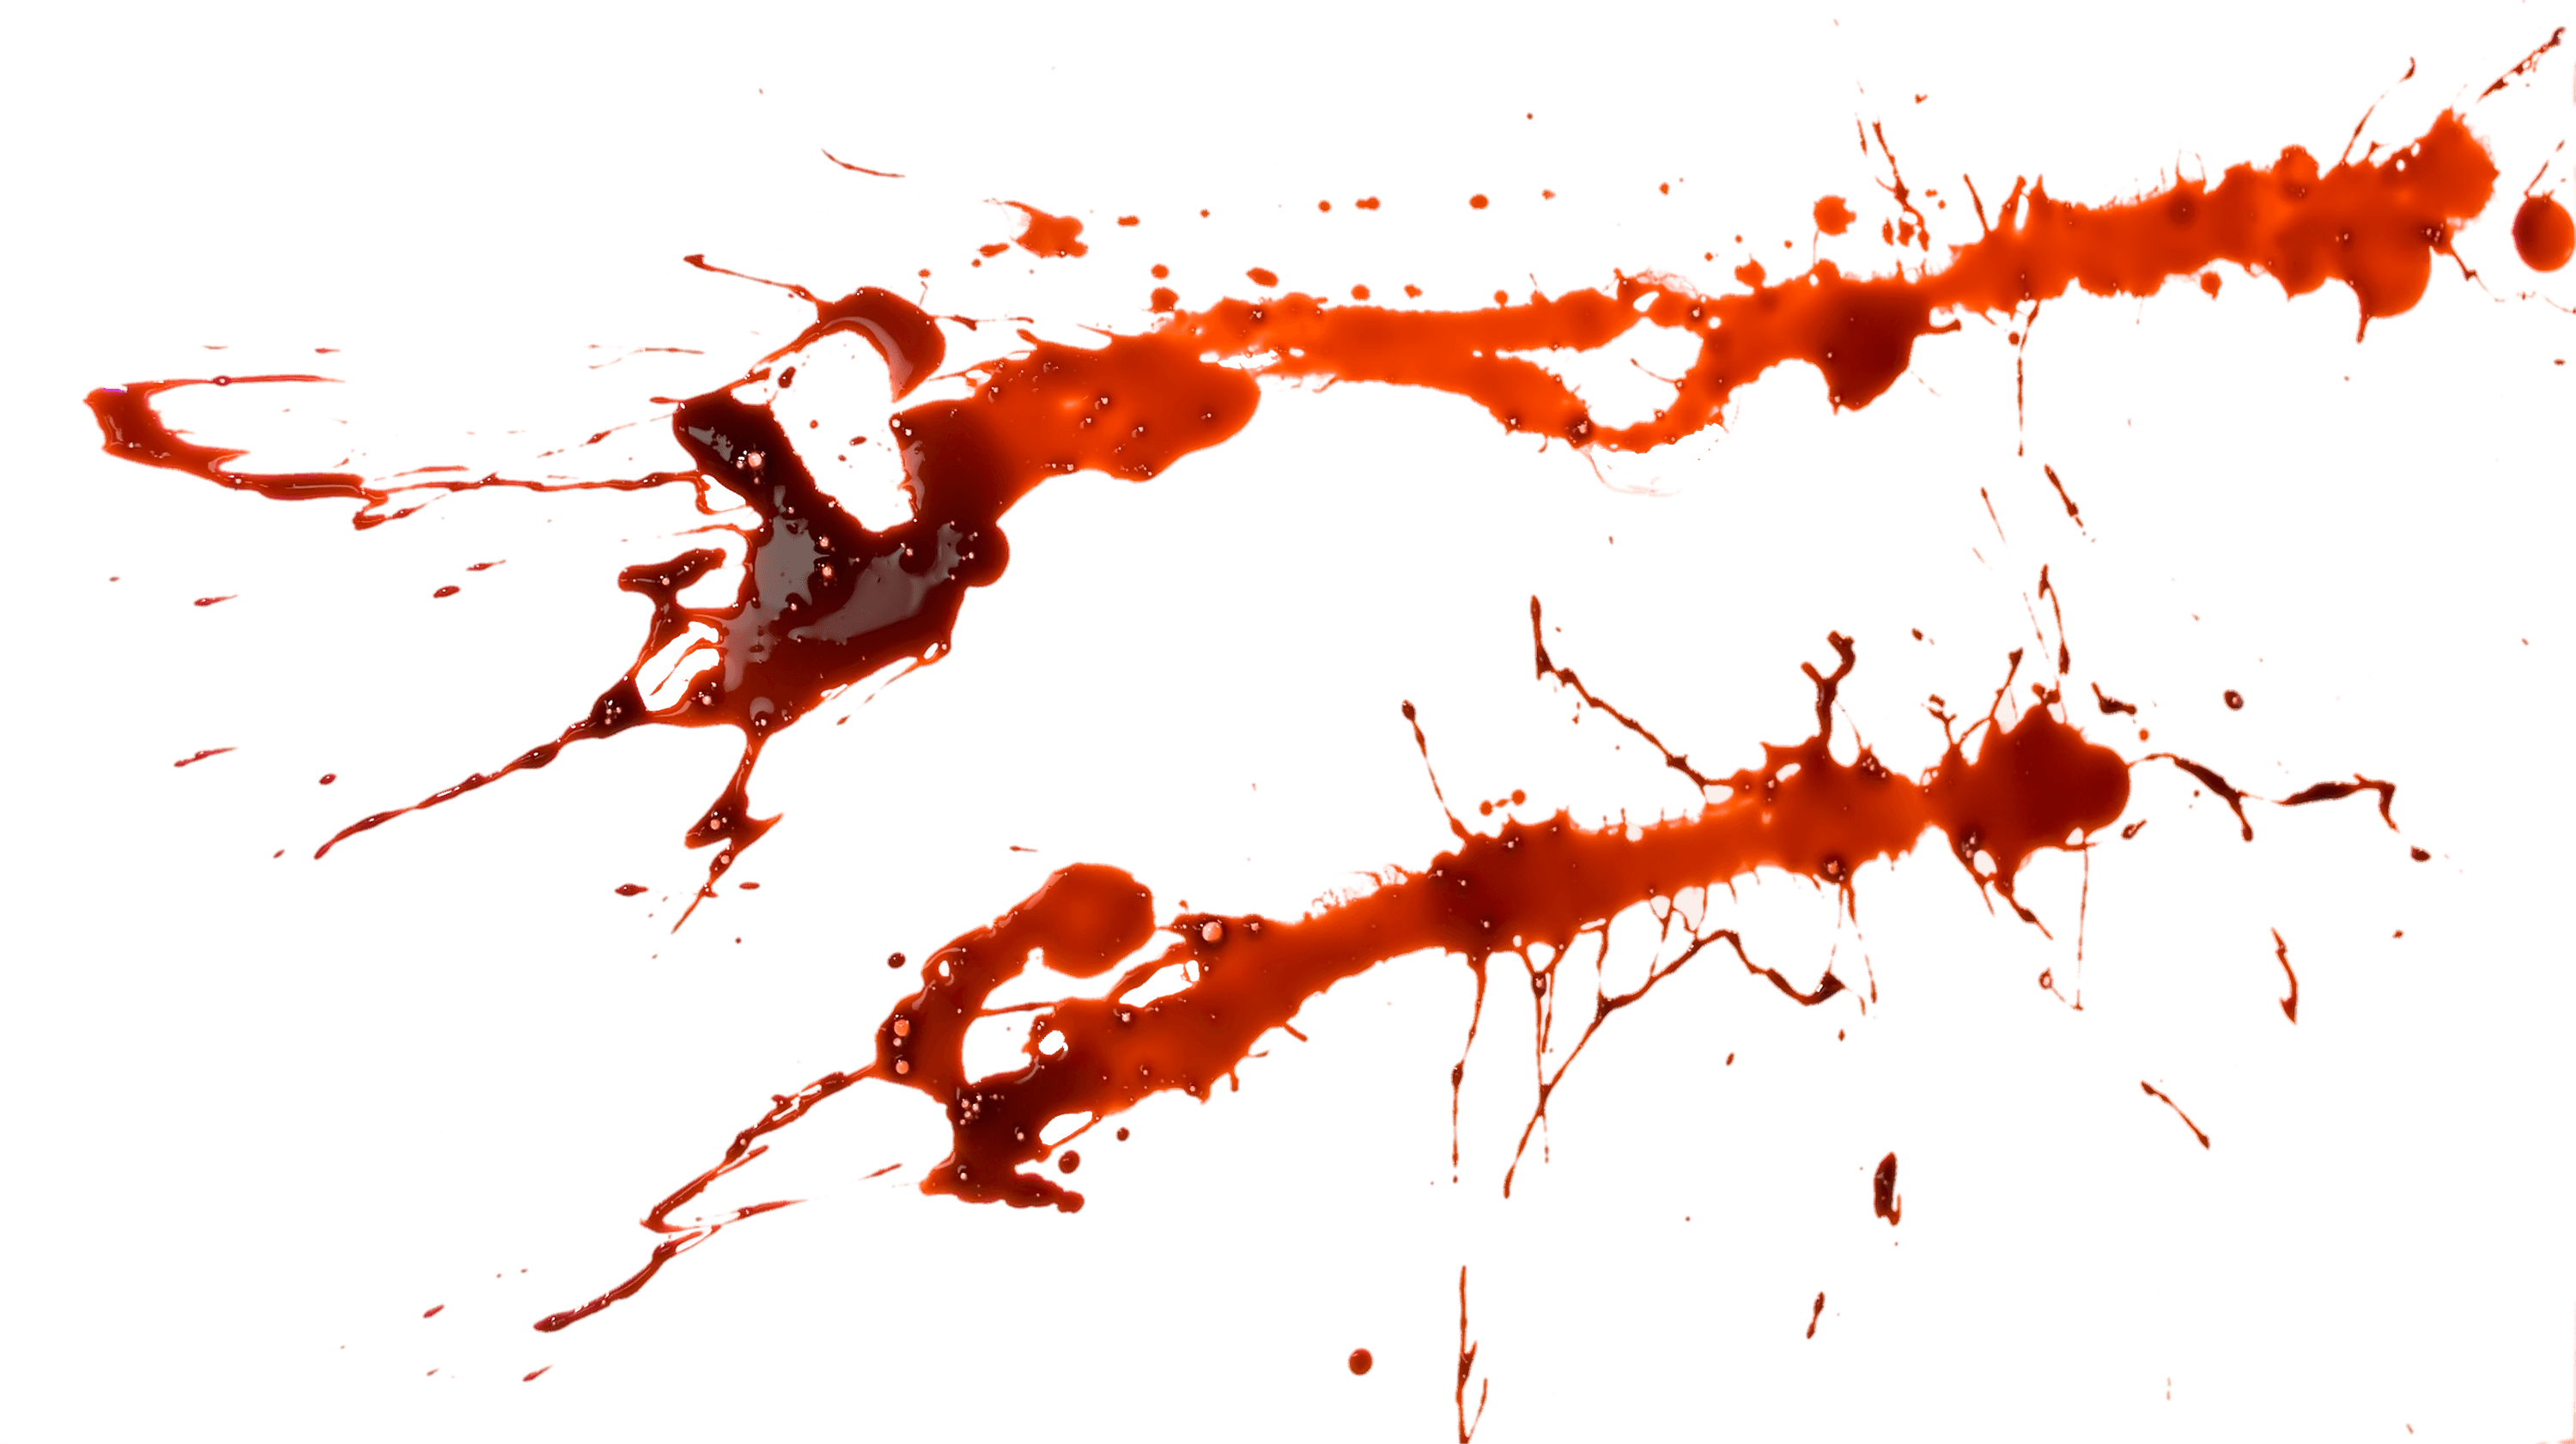 Transparent png images download. Blood stain stickpng